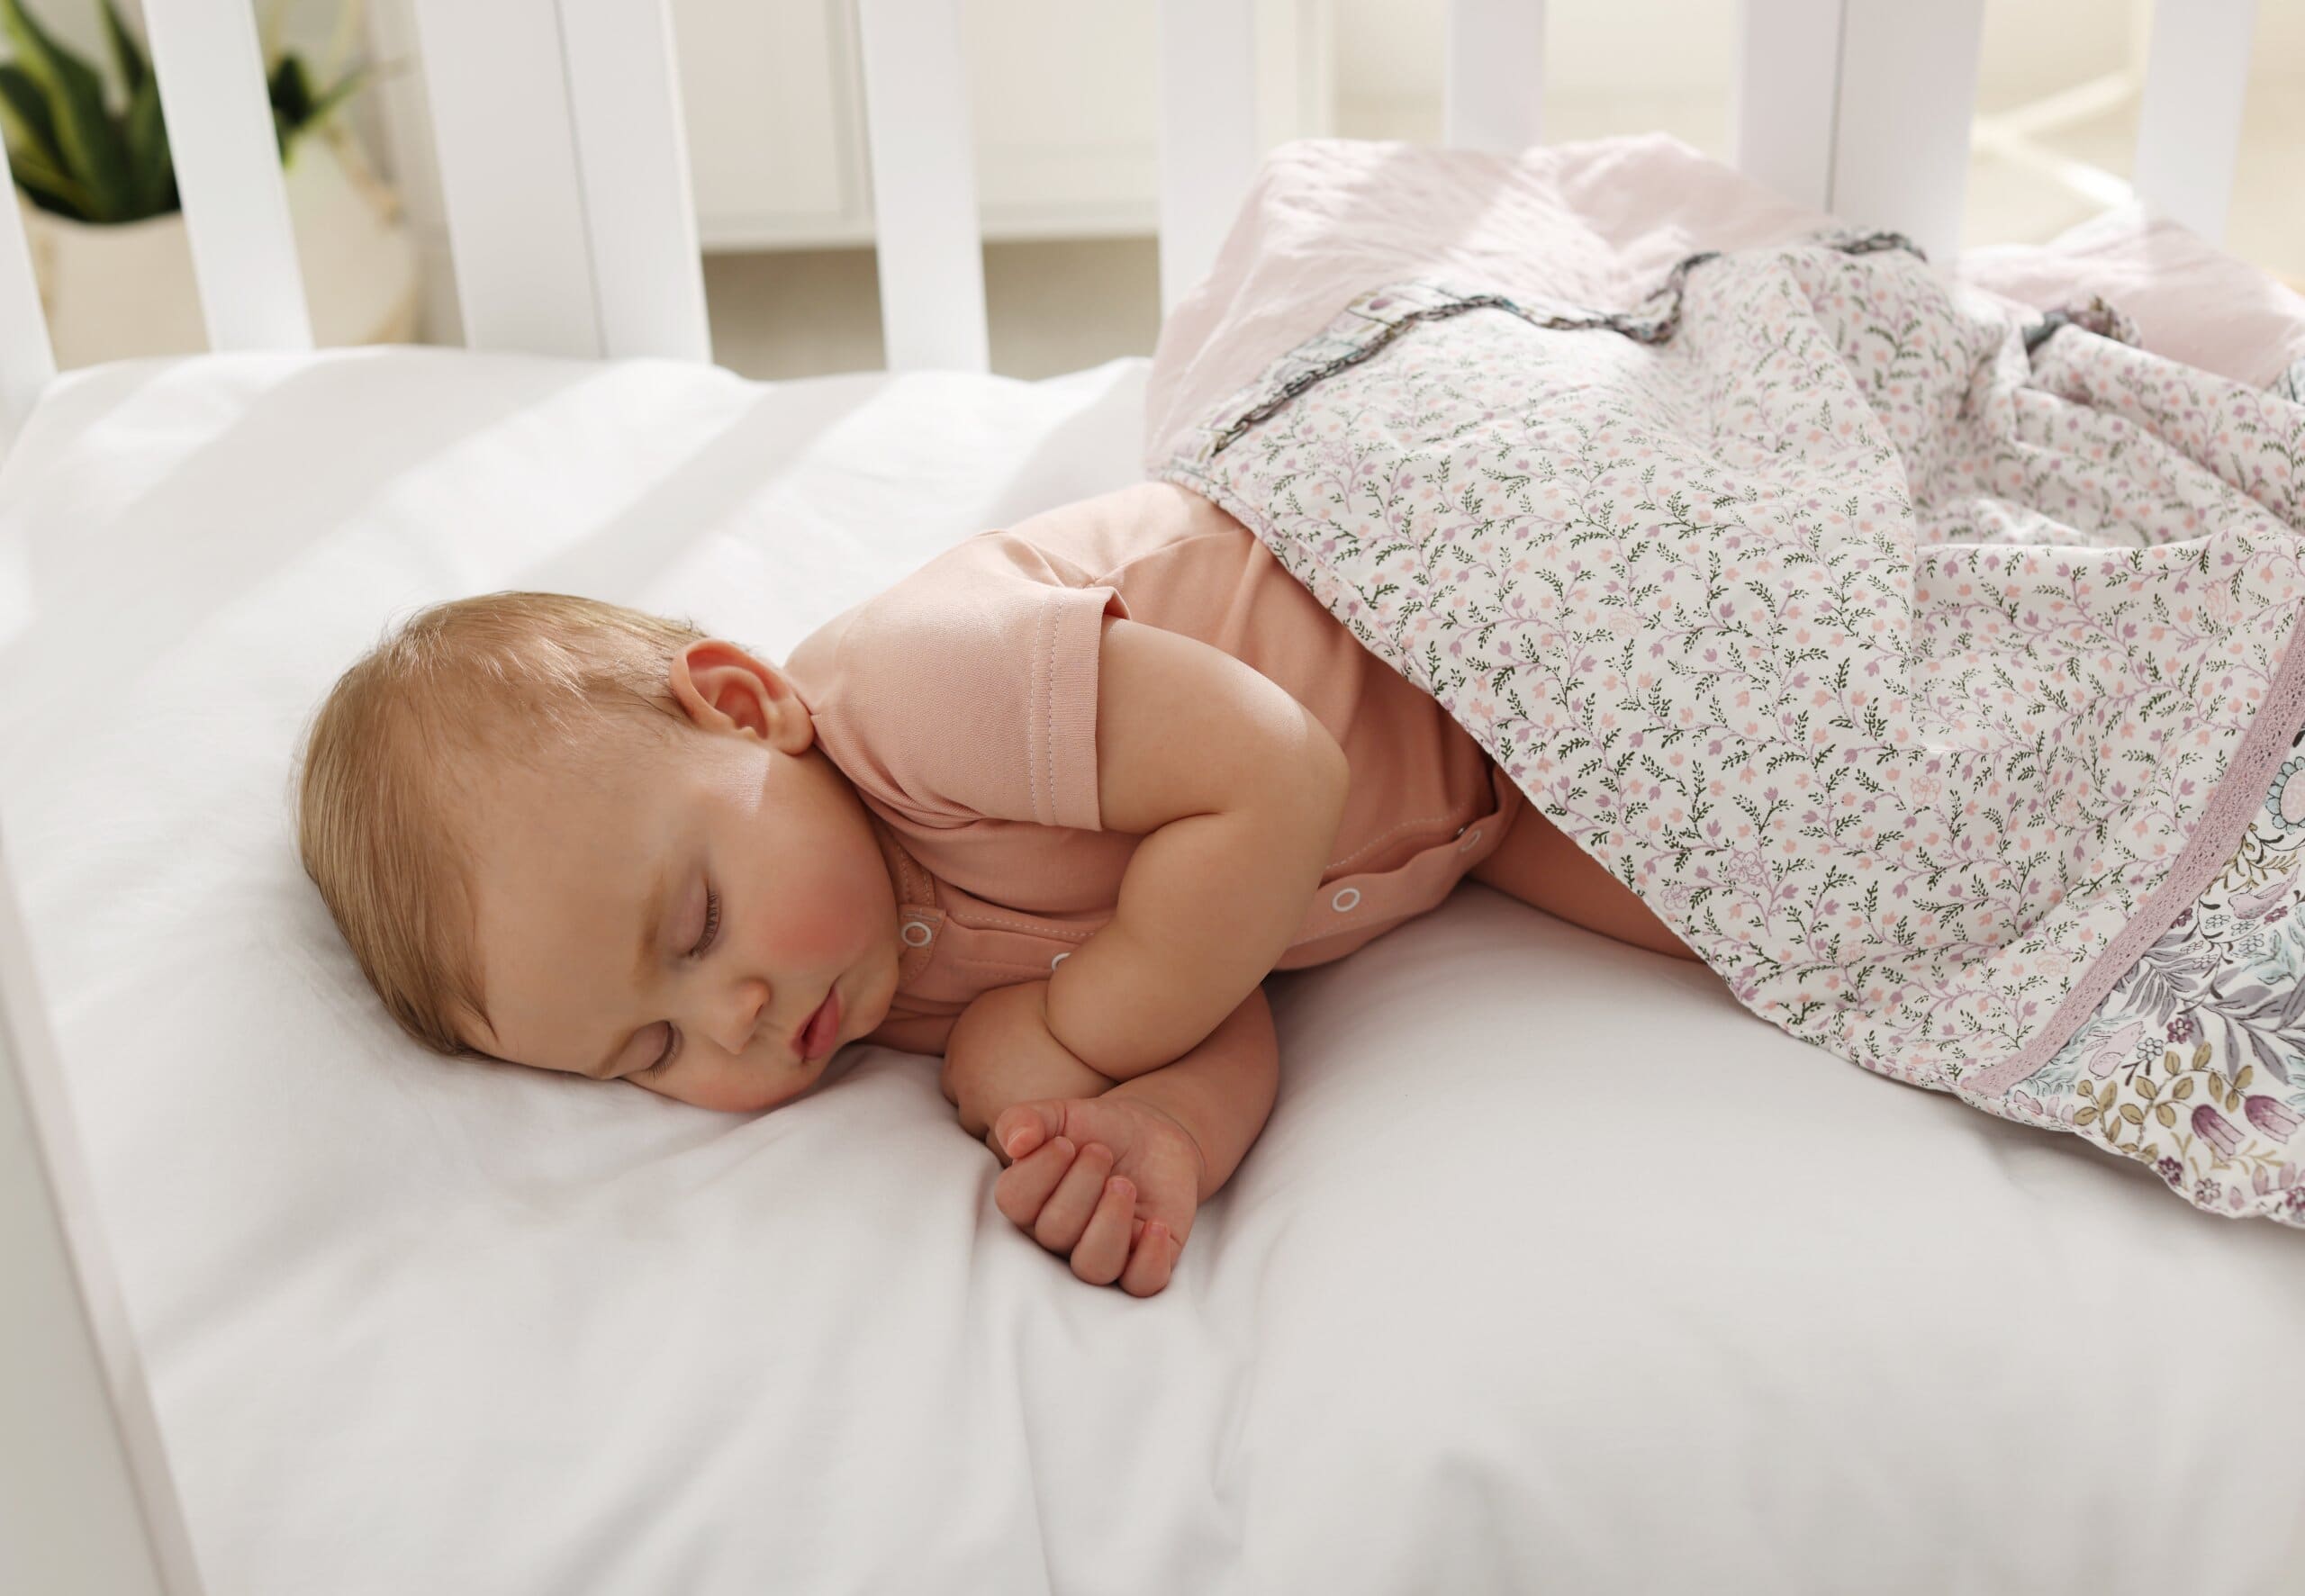 Baby sleeping in a cot bed.